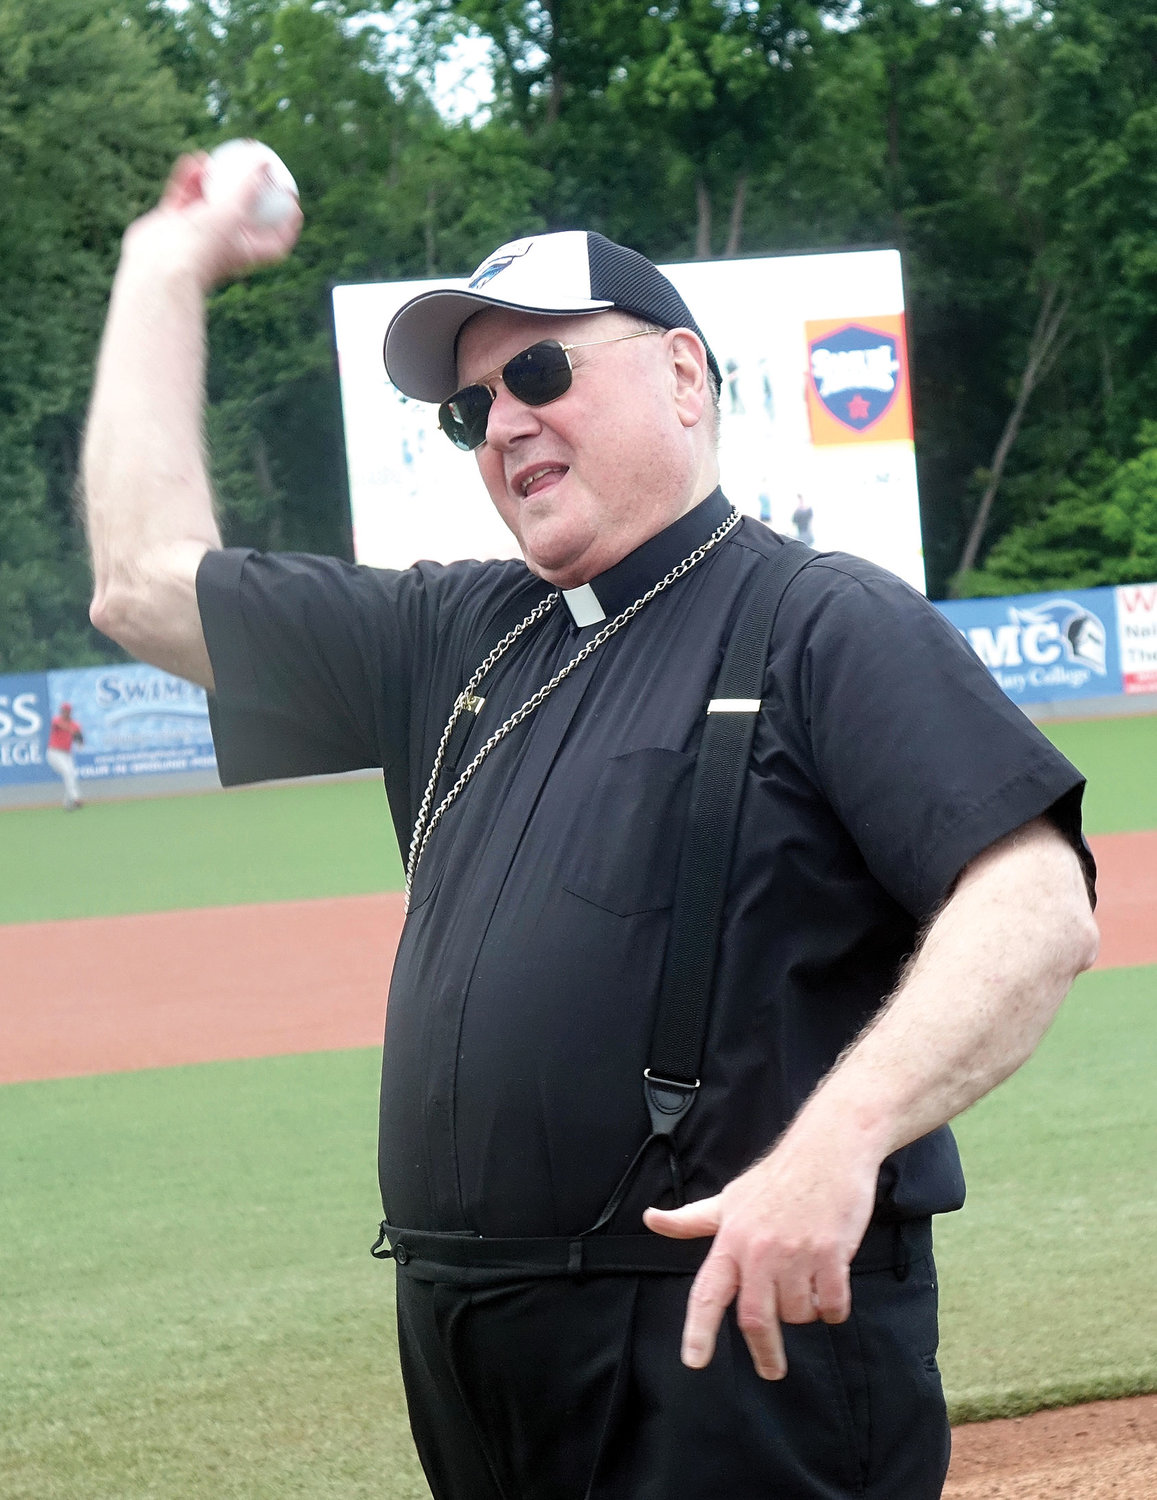 Cardinal Dolan throws out a ceremonial first pitch before the New York-Penn League game between the Hudson Valley Renegades and Lowell Spinners.